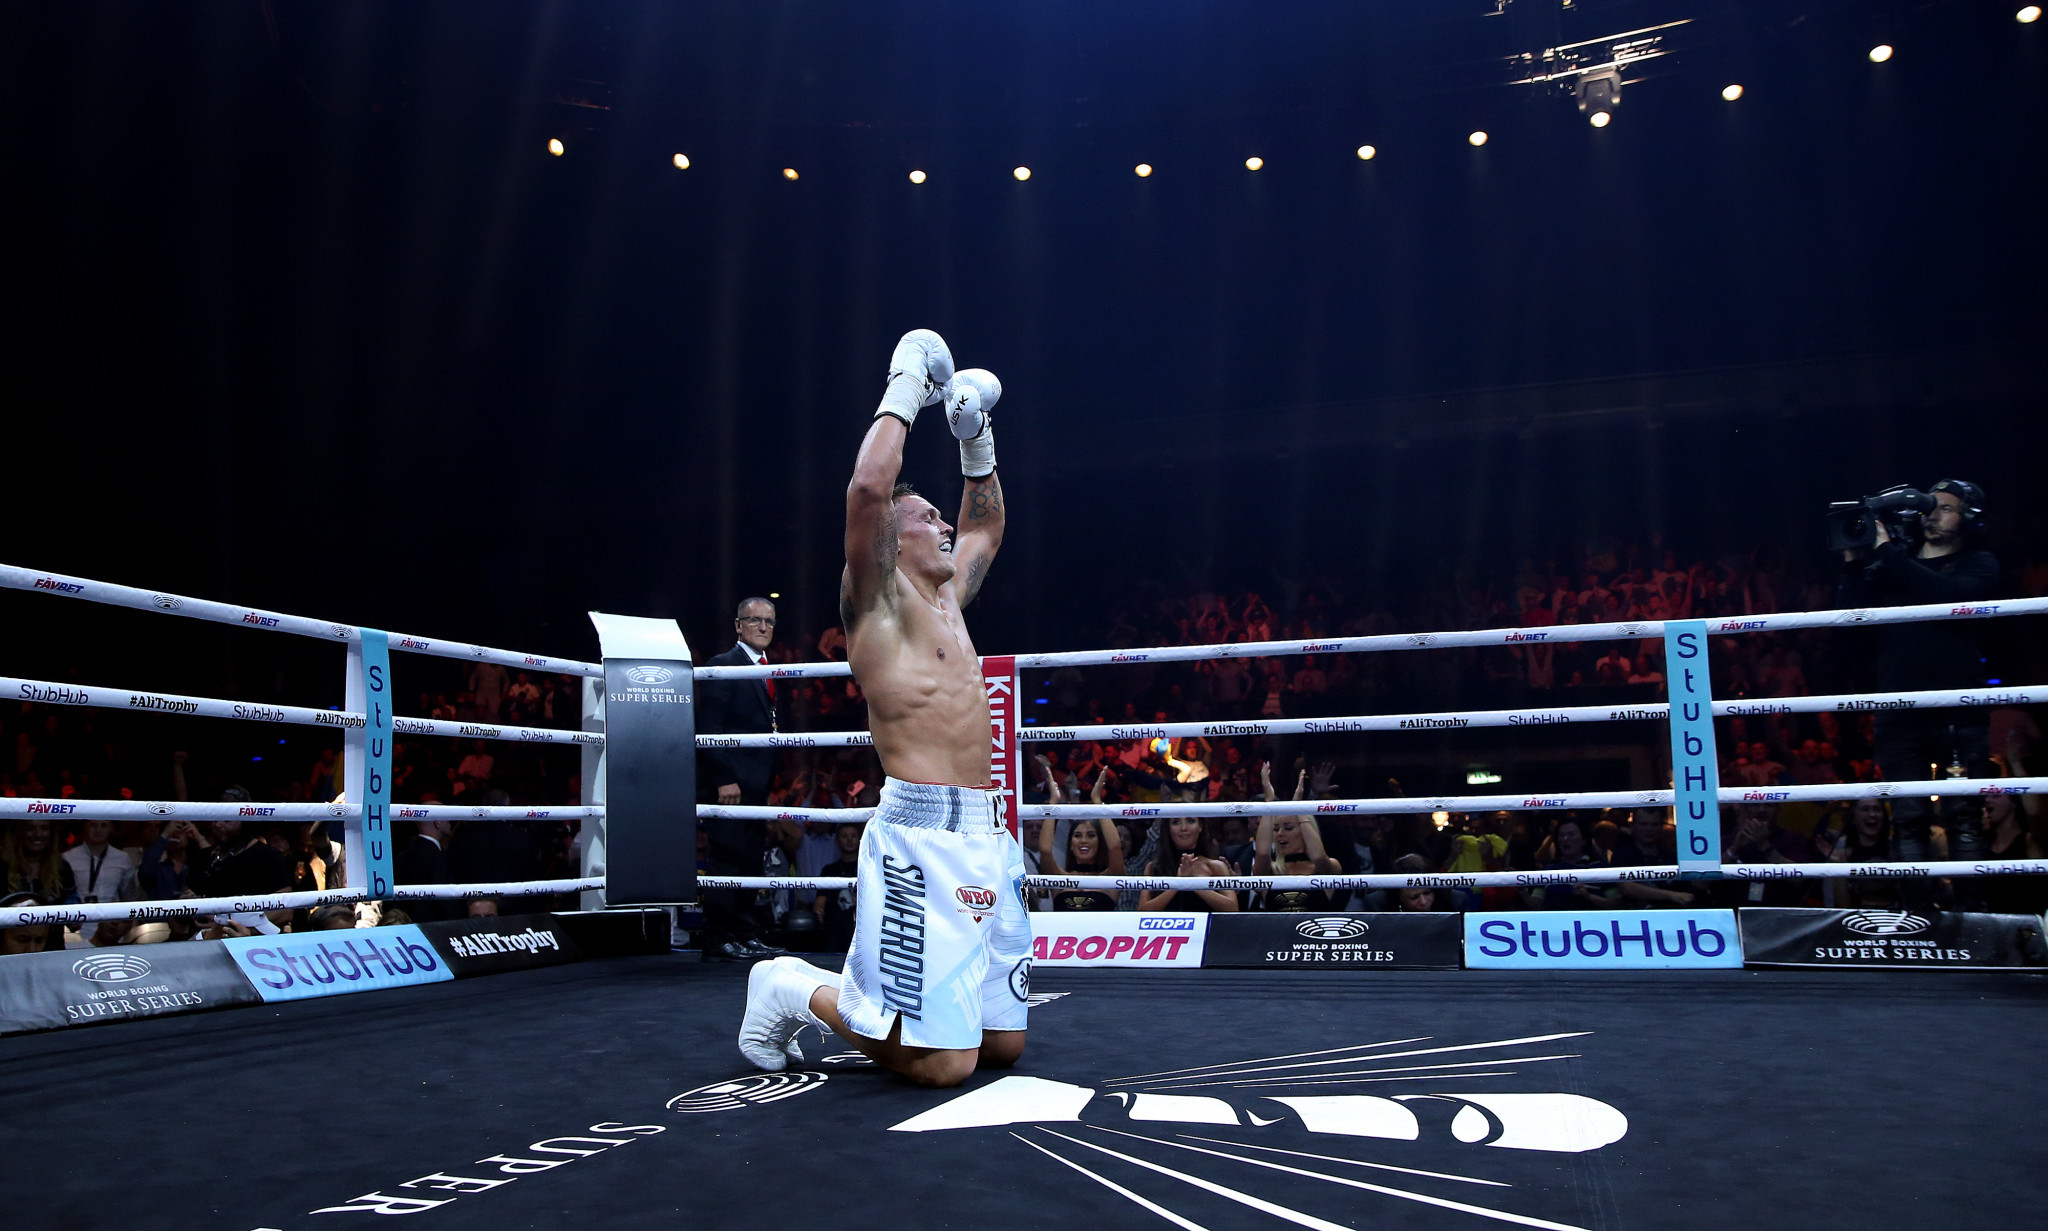 Olexsandr Usyk claimed a memorable win on Russian soil ©Getty Images